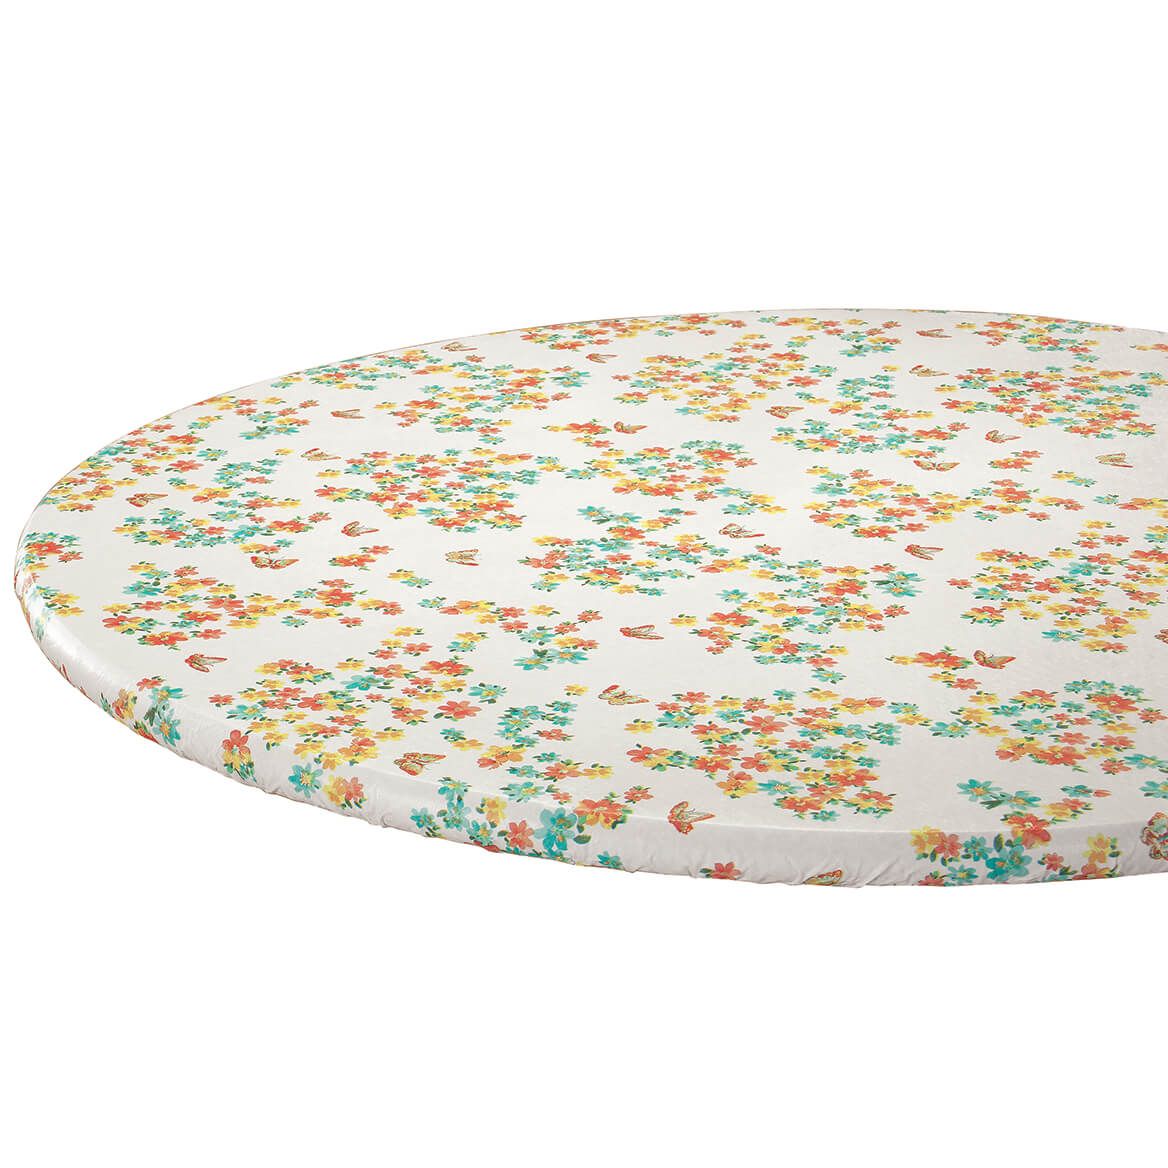 Butterfly Bliss Elasticized Table Cover by Chef's Pride + '-' + 373218